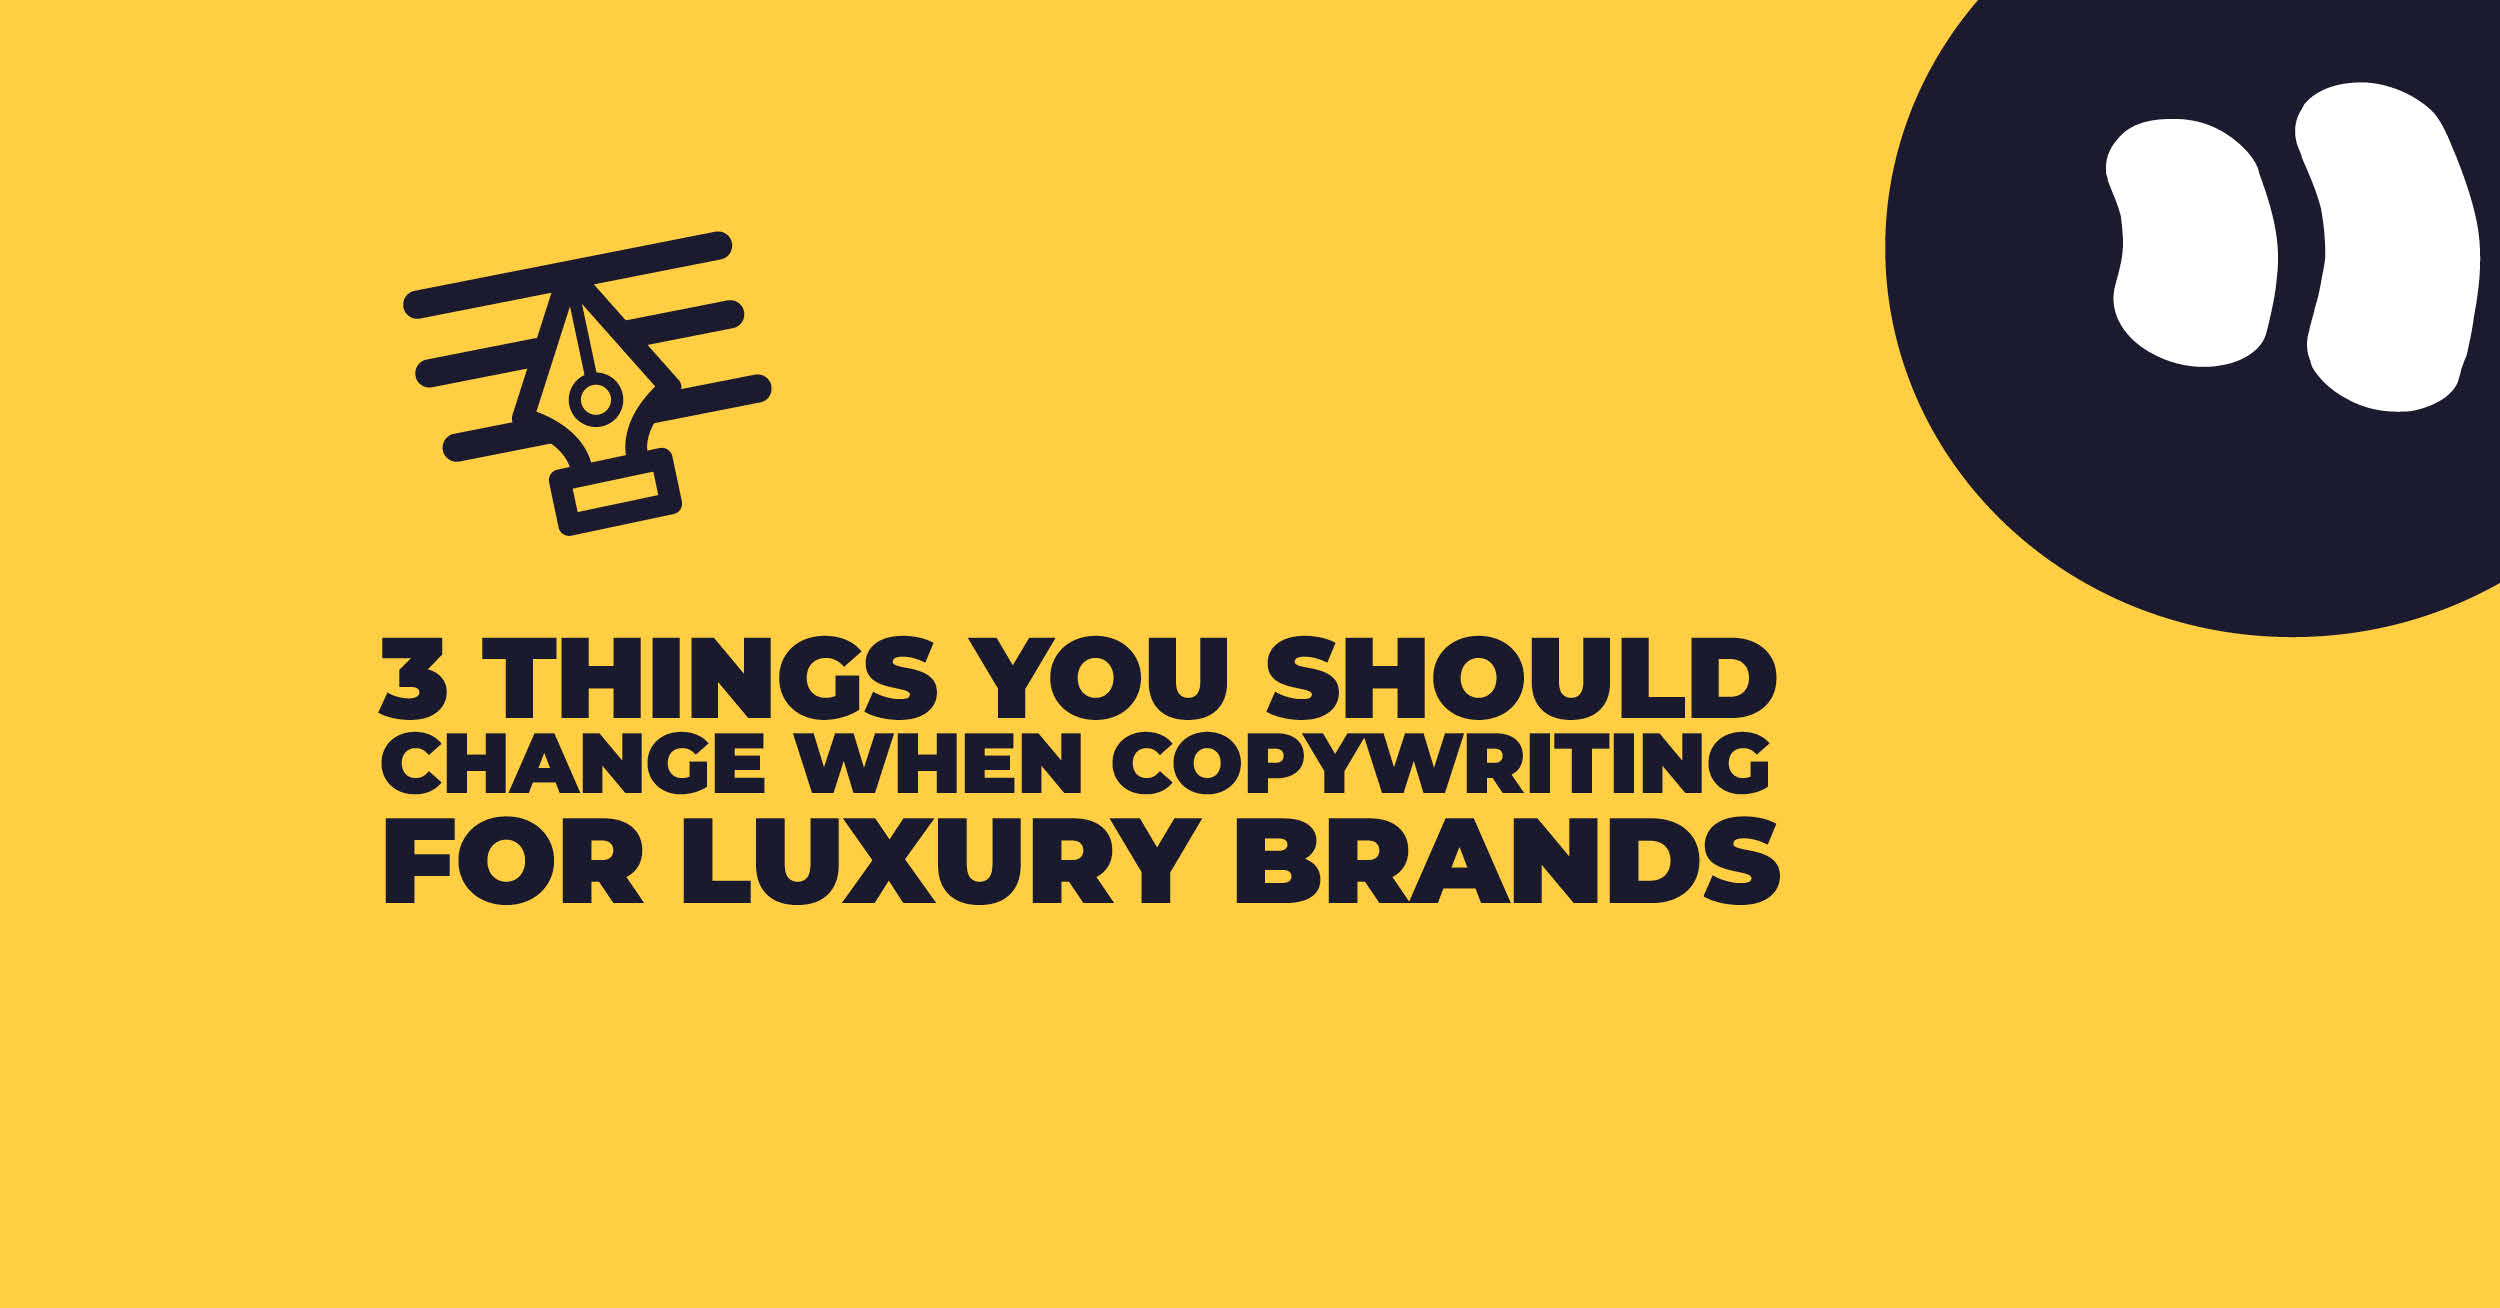 3 Things You Should Change When Copywriting For Luxury Brands